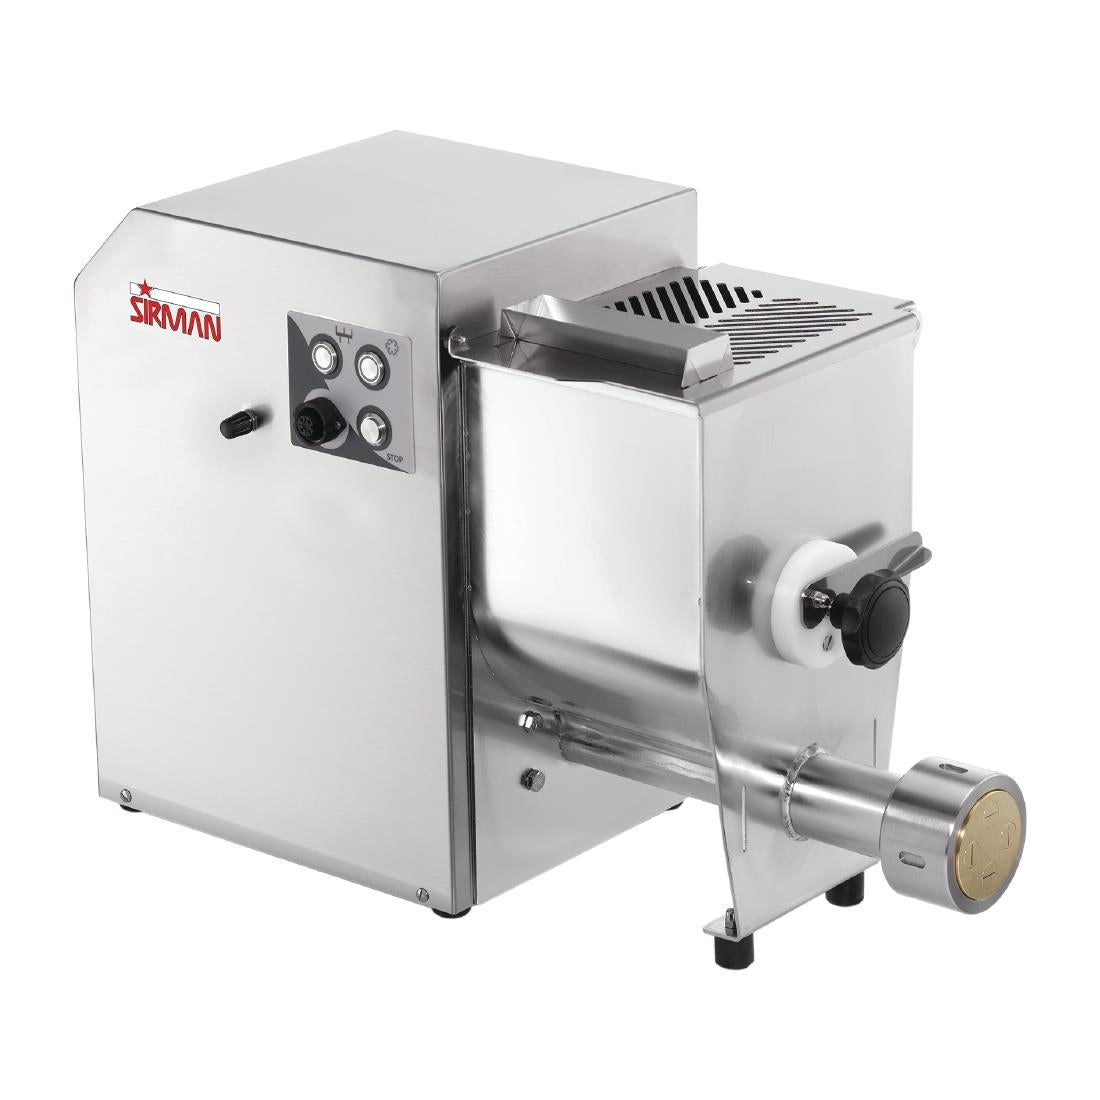 DM689-SPA Sirman Concerto 5 Pasta Machine with Spaghetti 1.9mm Die JD Catering Equipment Solutions Ltd